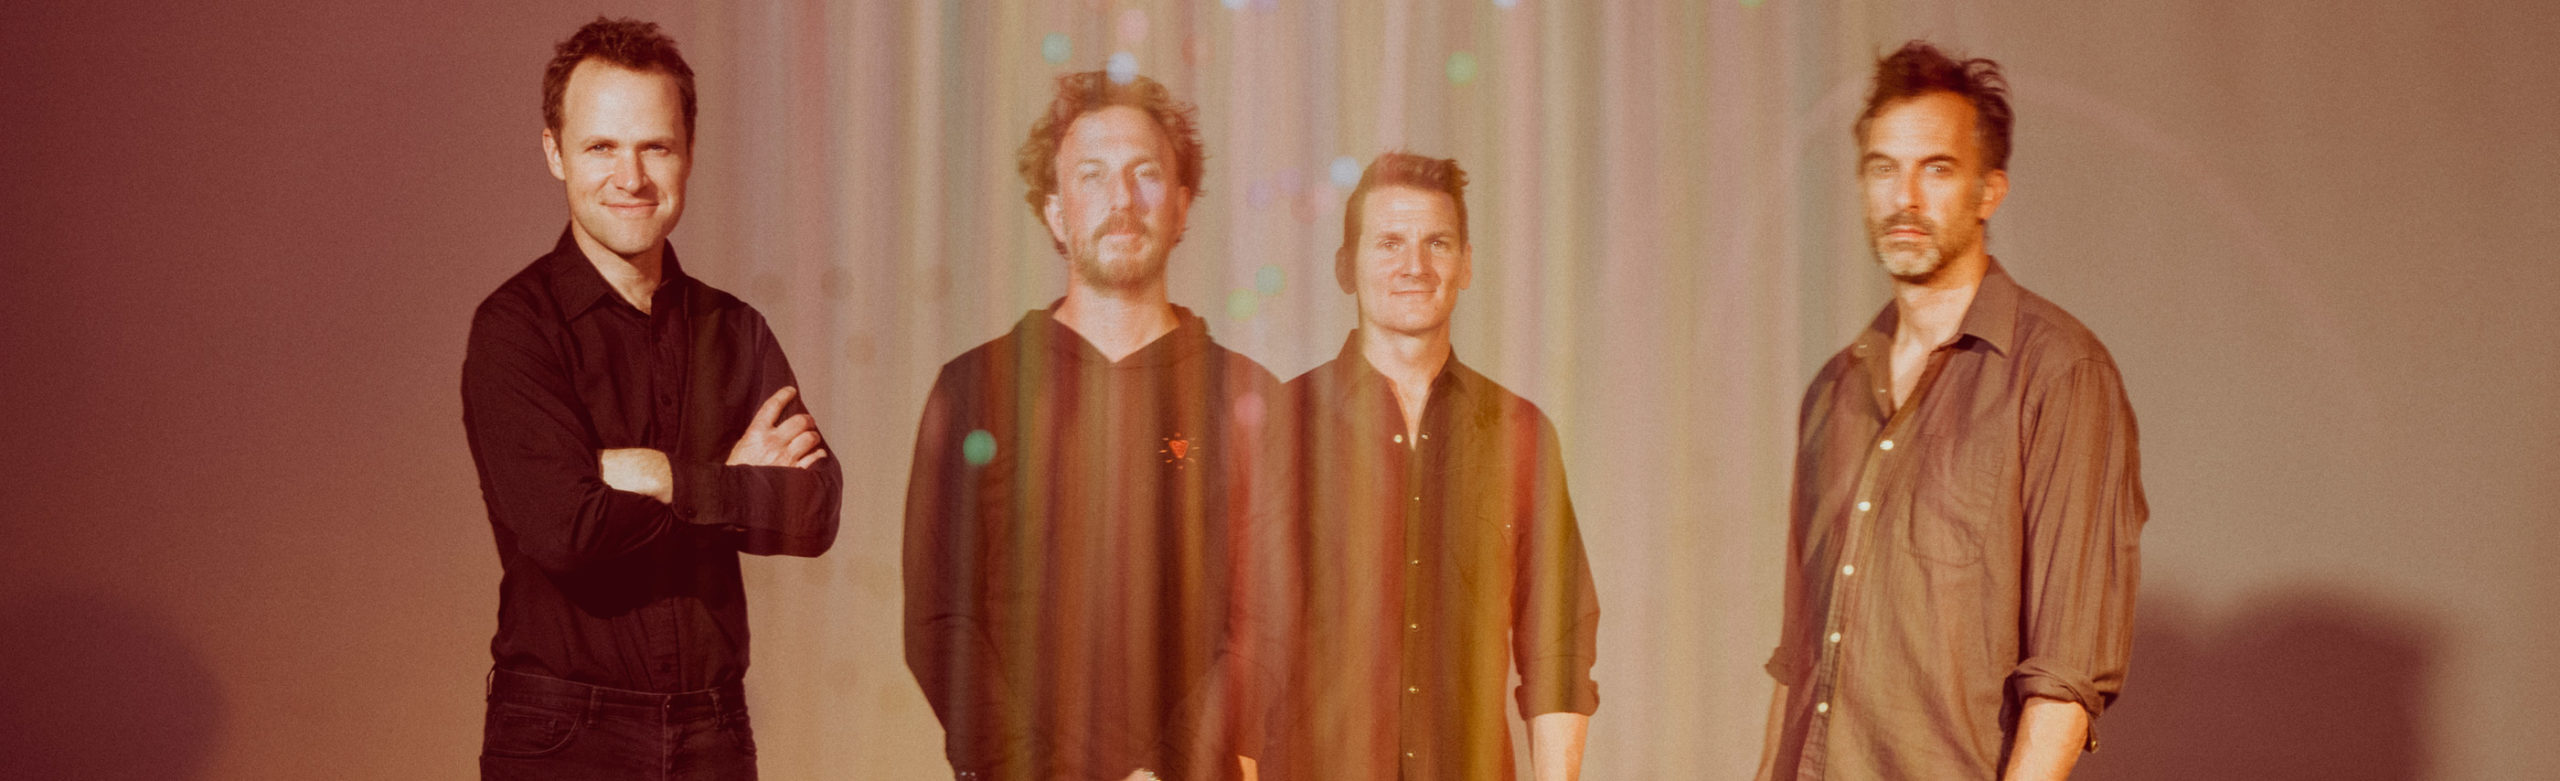 Look Alive: Guster Will Bring Album Release Tour to Missoula Image